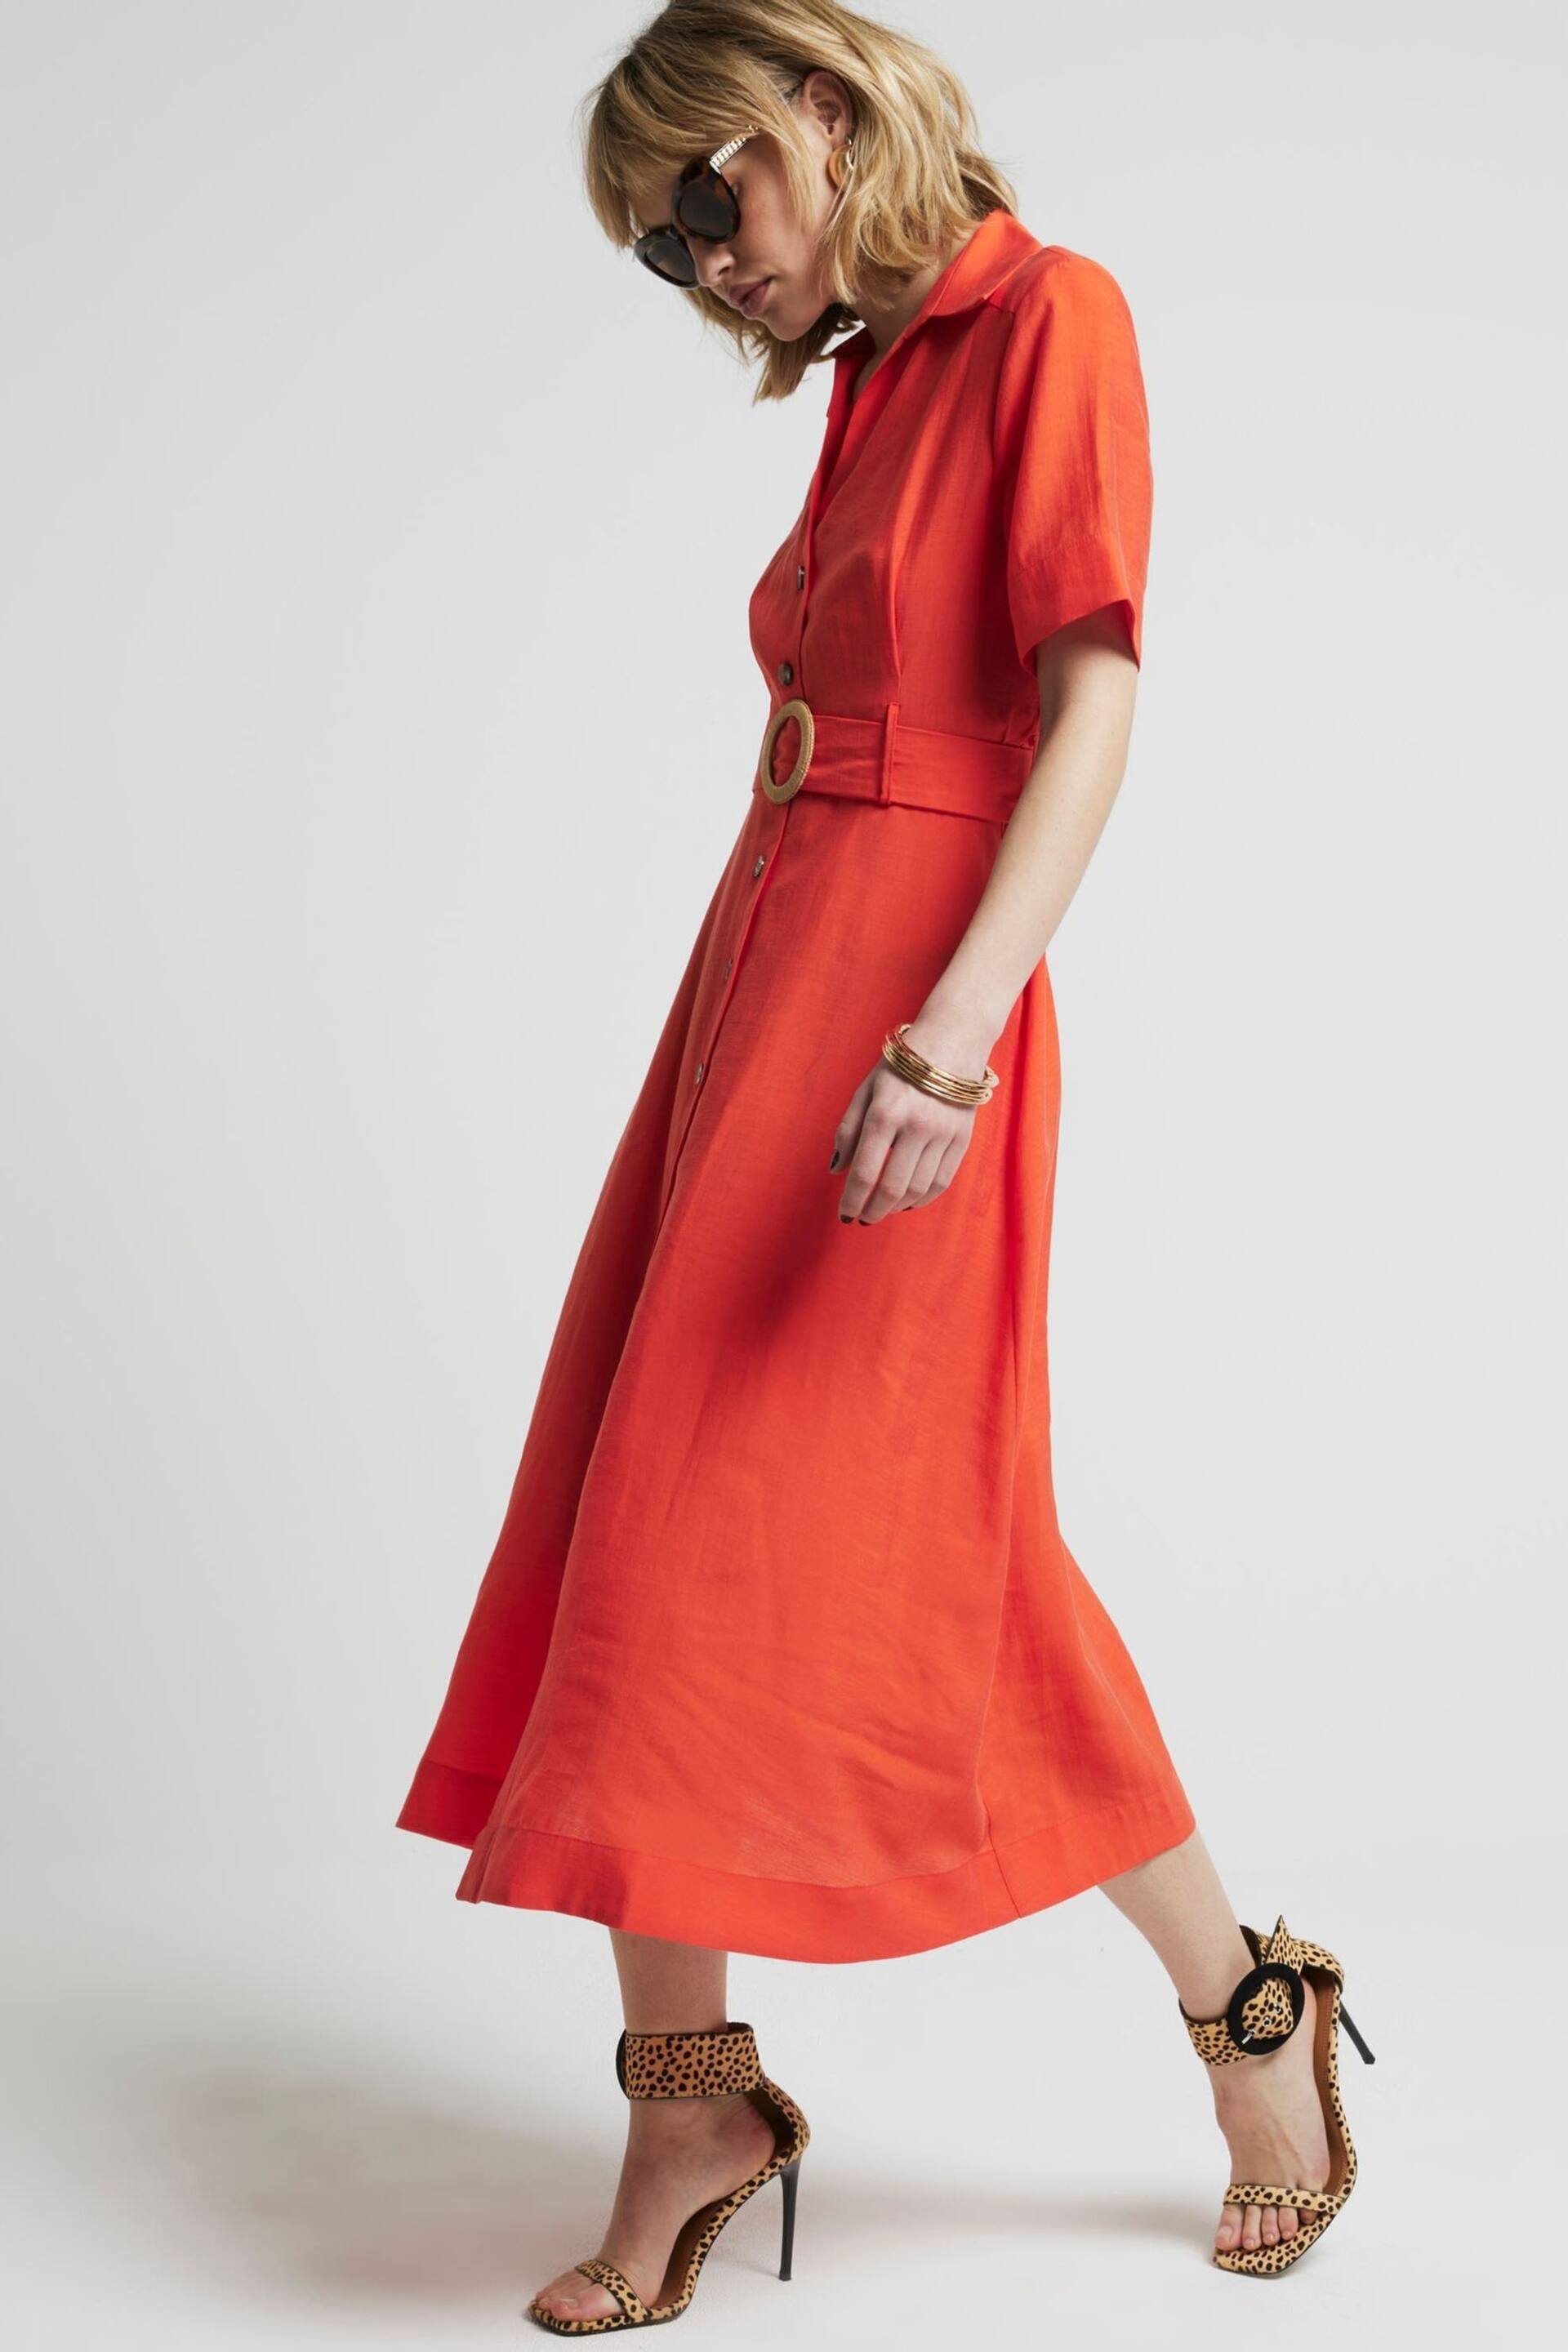 River Island Red Belted Shirt Dress - Image 2 of 4